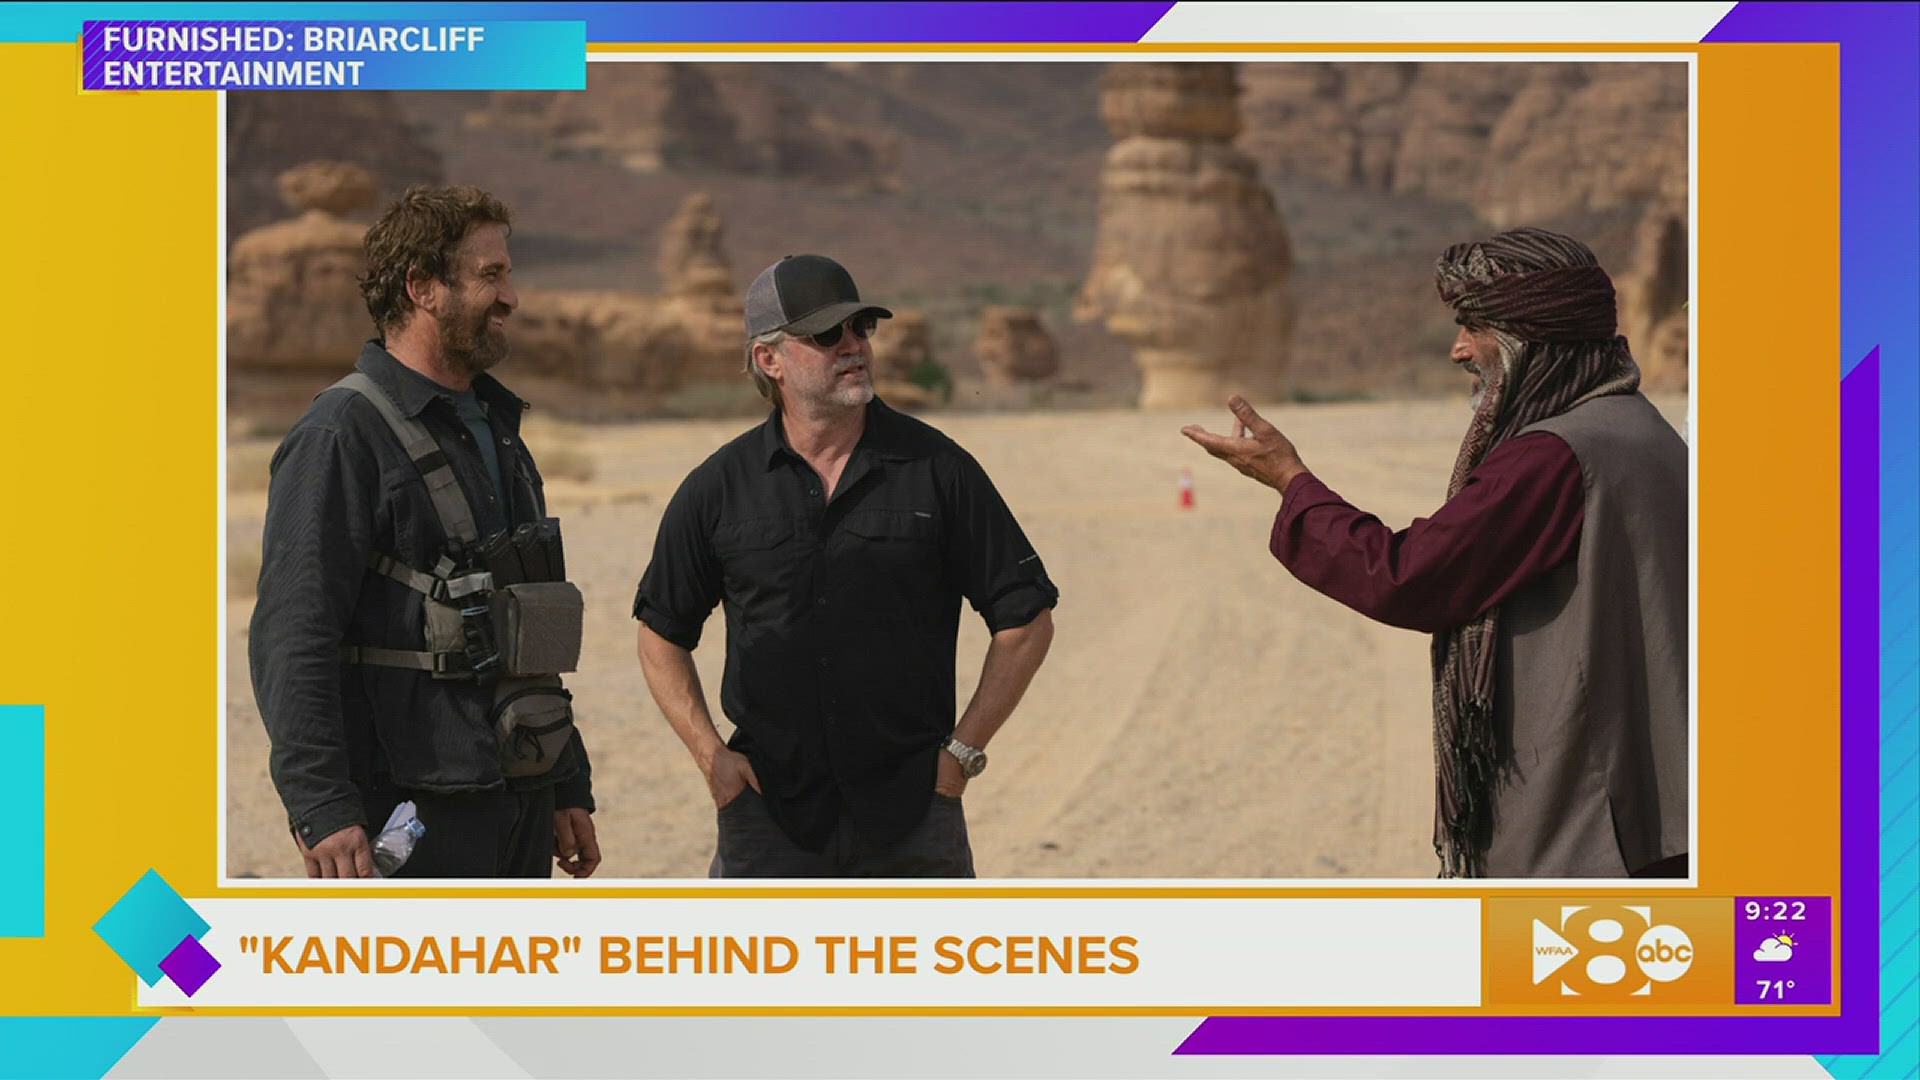 Austin based film director Ric Roman Waugh takes us behind the scenes of the new action thriller "Kandahar" starring Gerald Butler opening in movie theaters May 26